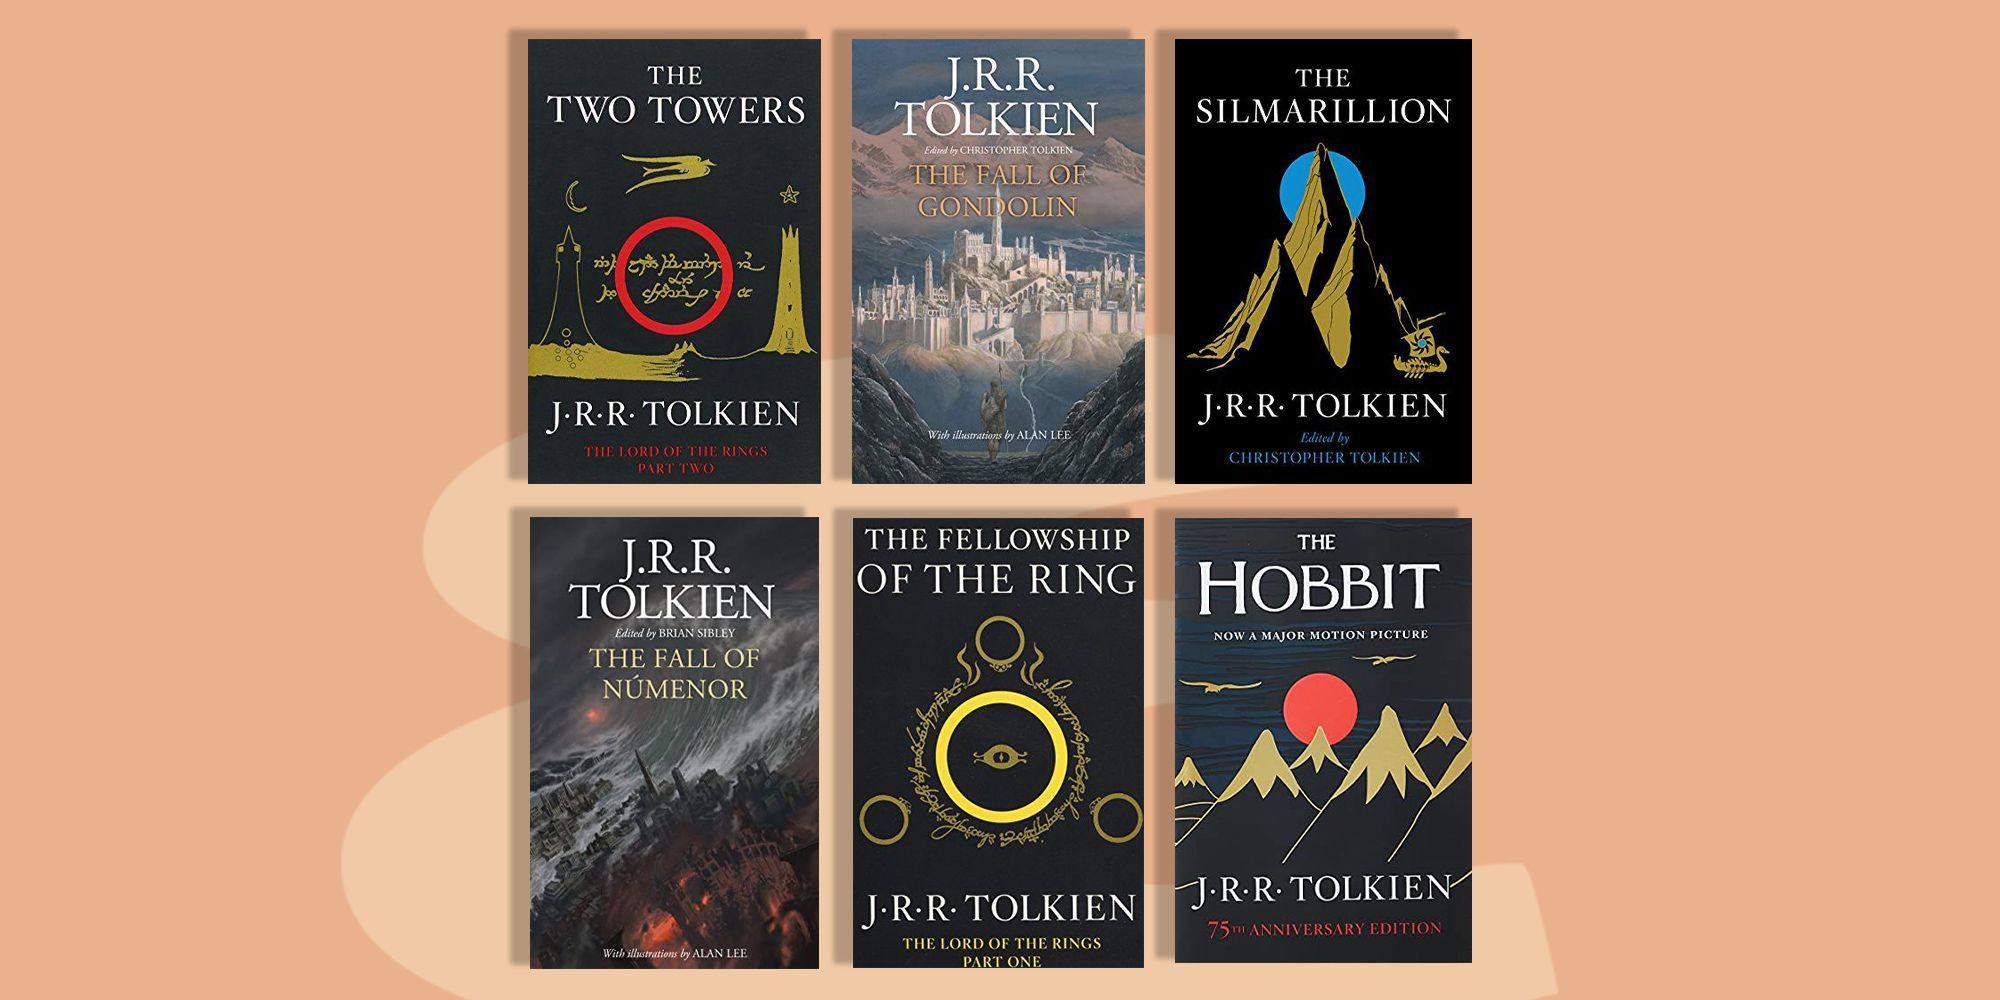 Silmarillion + Hobbit + Lord of the Rings (Combo Set) Paperback by JRR